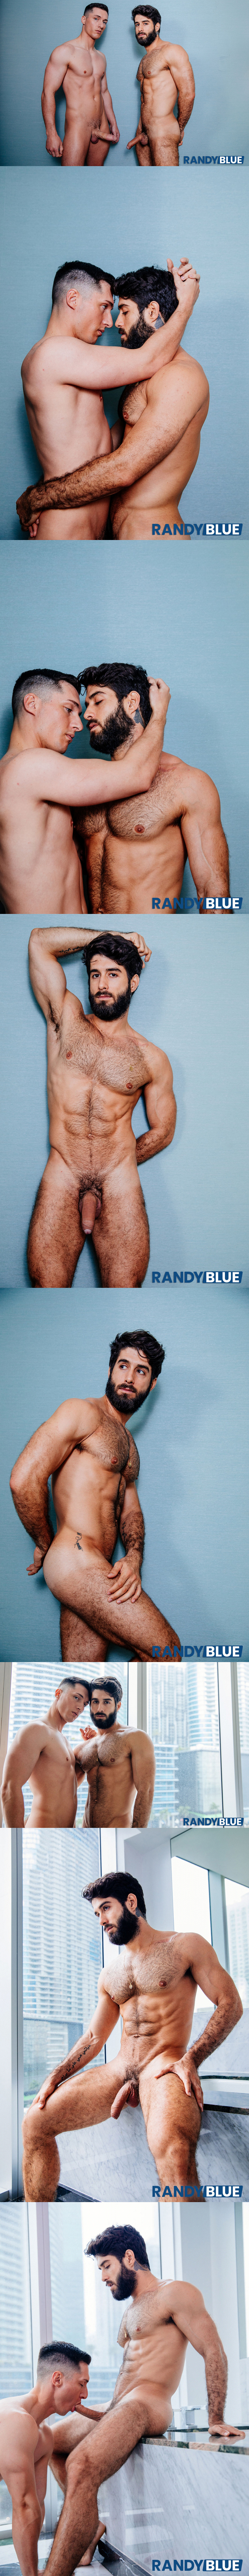 Tristan Hunter Gets the Diego Sans Experience at RandyBlue